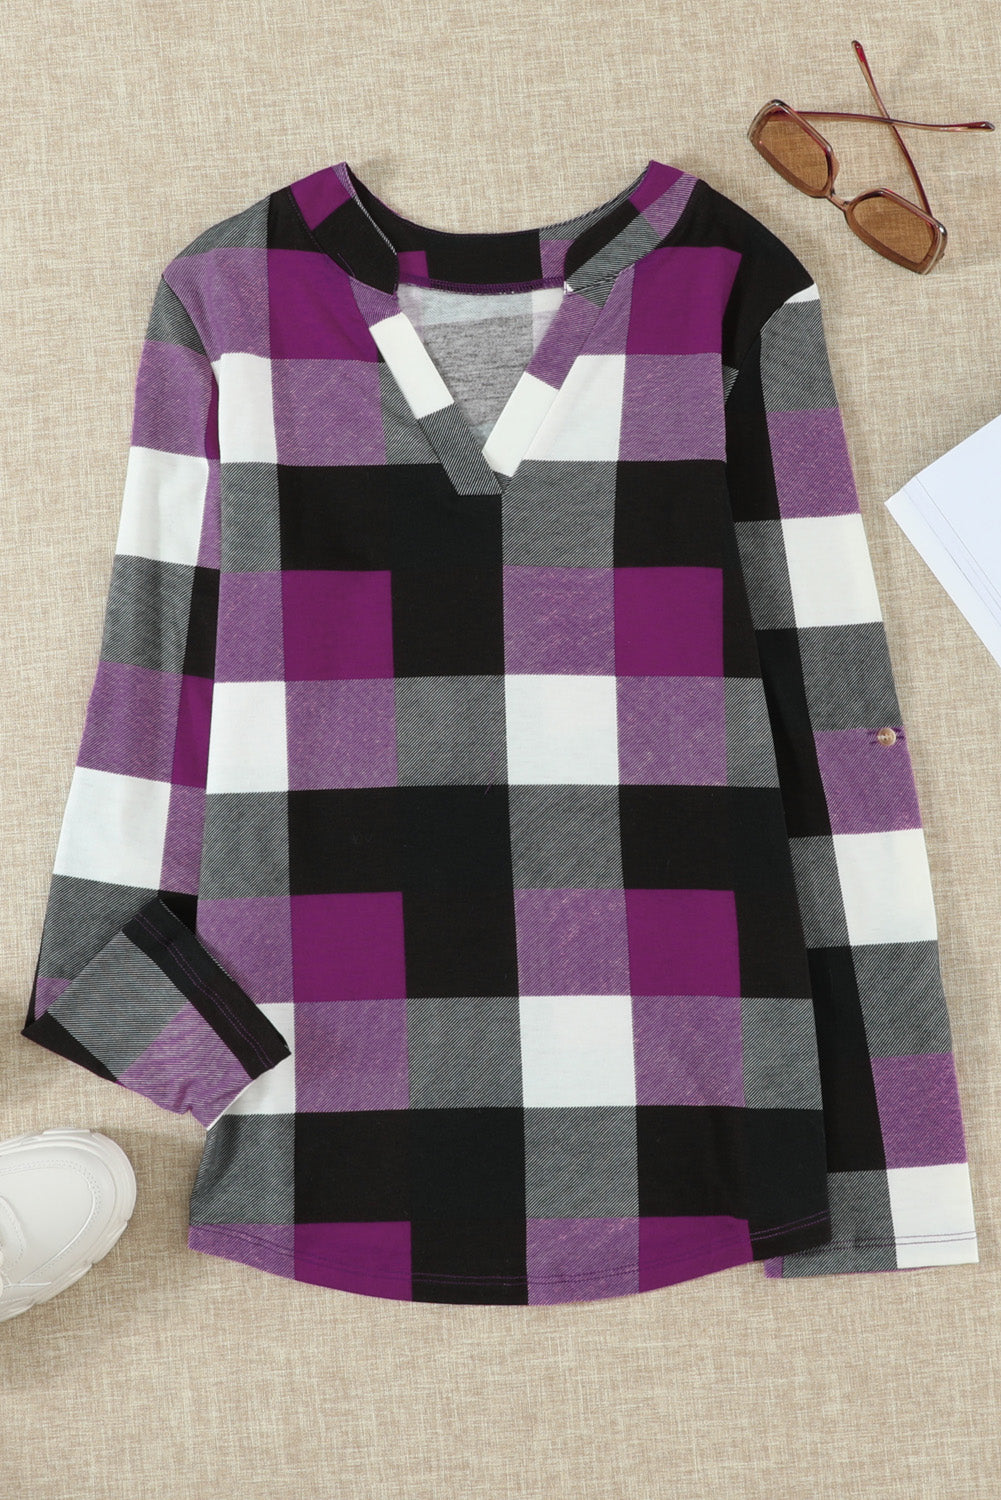 Roll-Up Long Sleeve Plaid Shirt Tops Casual V Neck Pullover Tunic Blouses Sai Feel